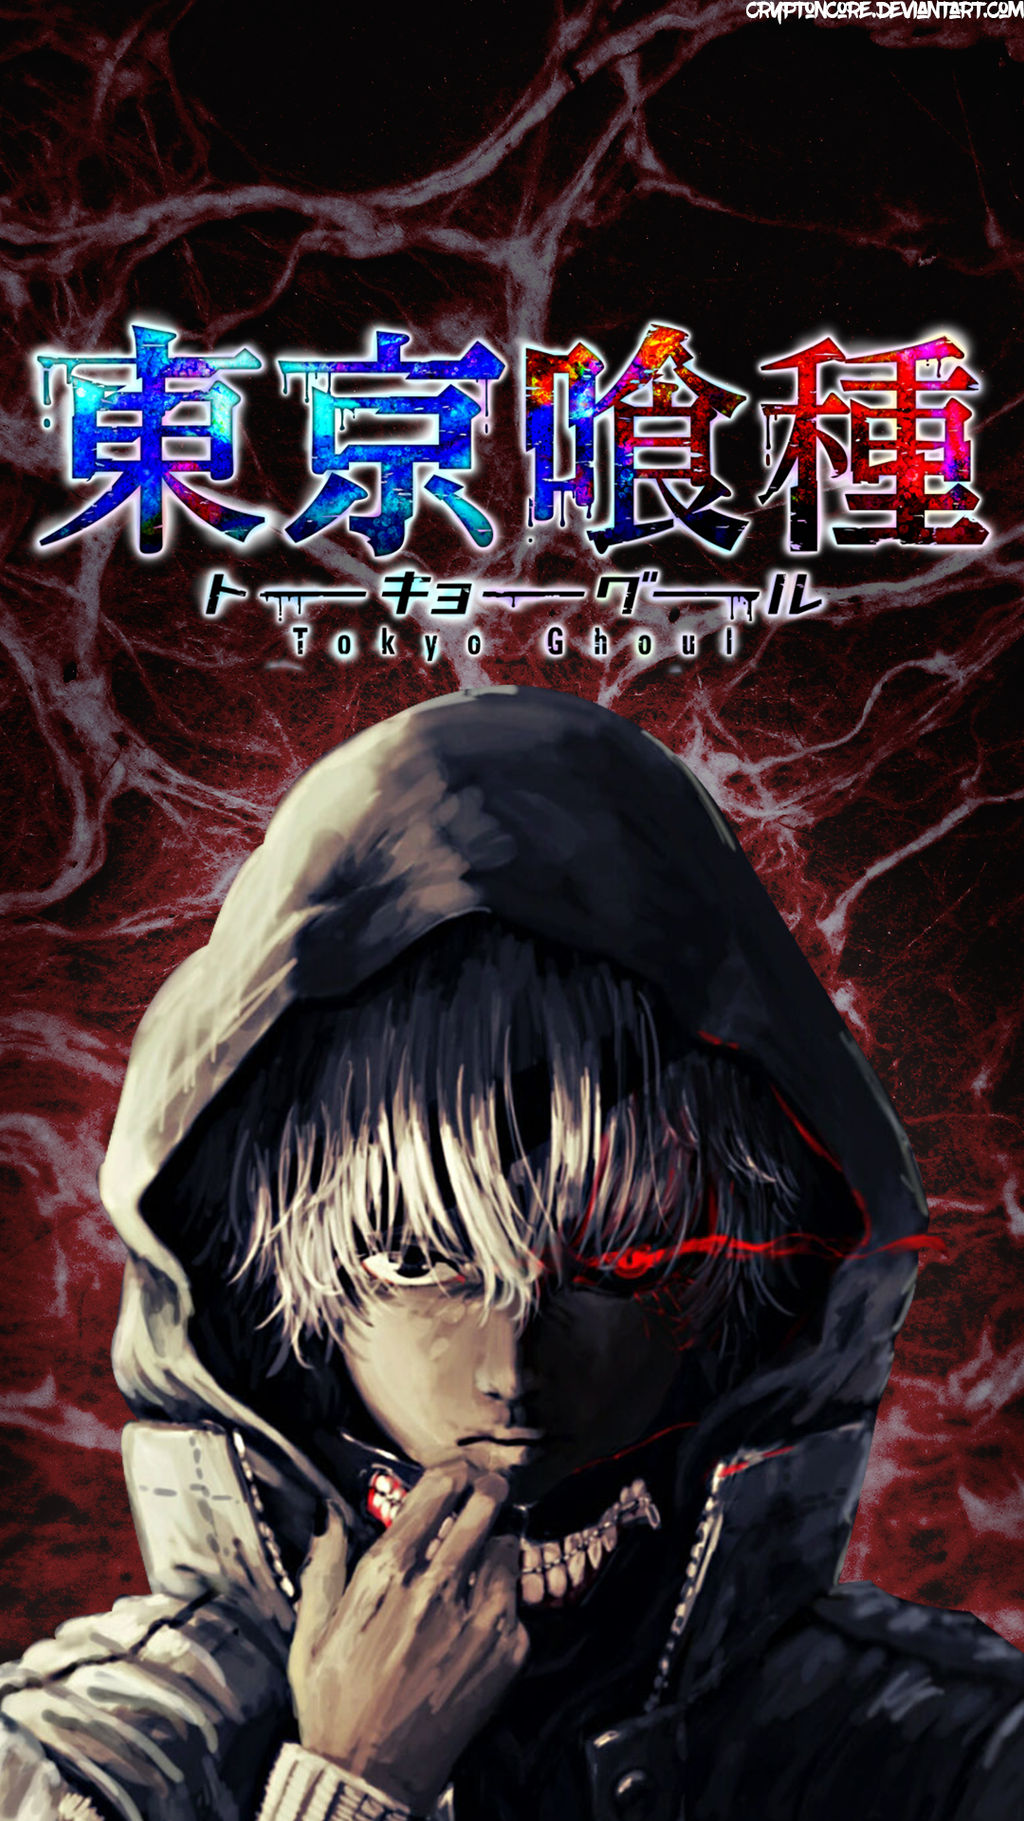 Tokyo Ghoul wallpaper phone variant by Cryptoncore on DeviantArt